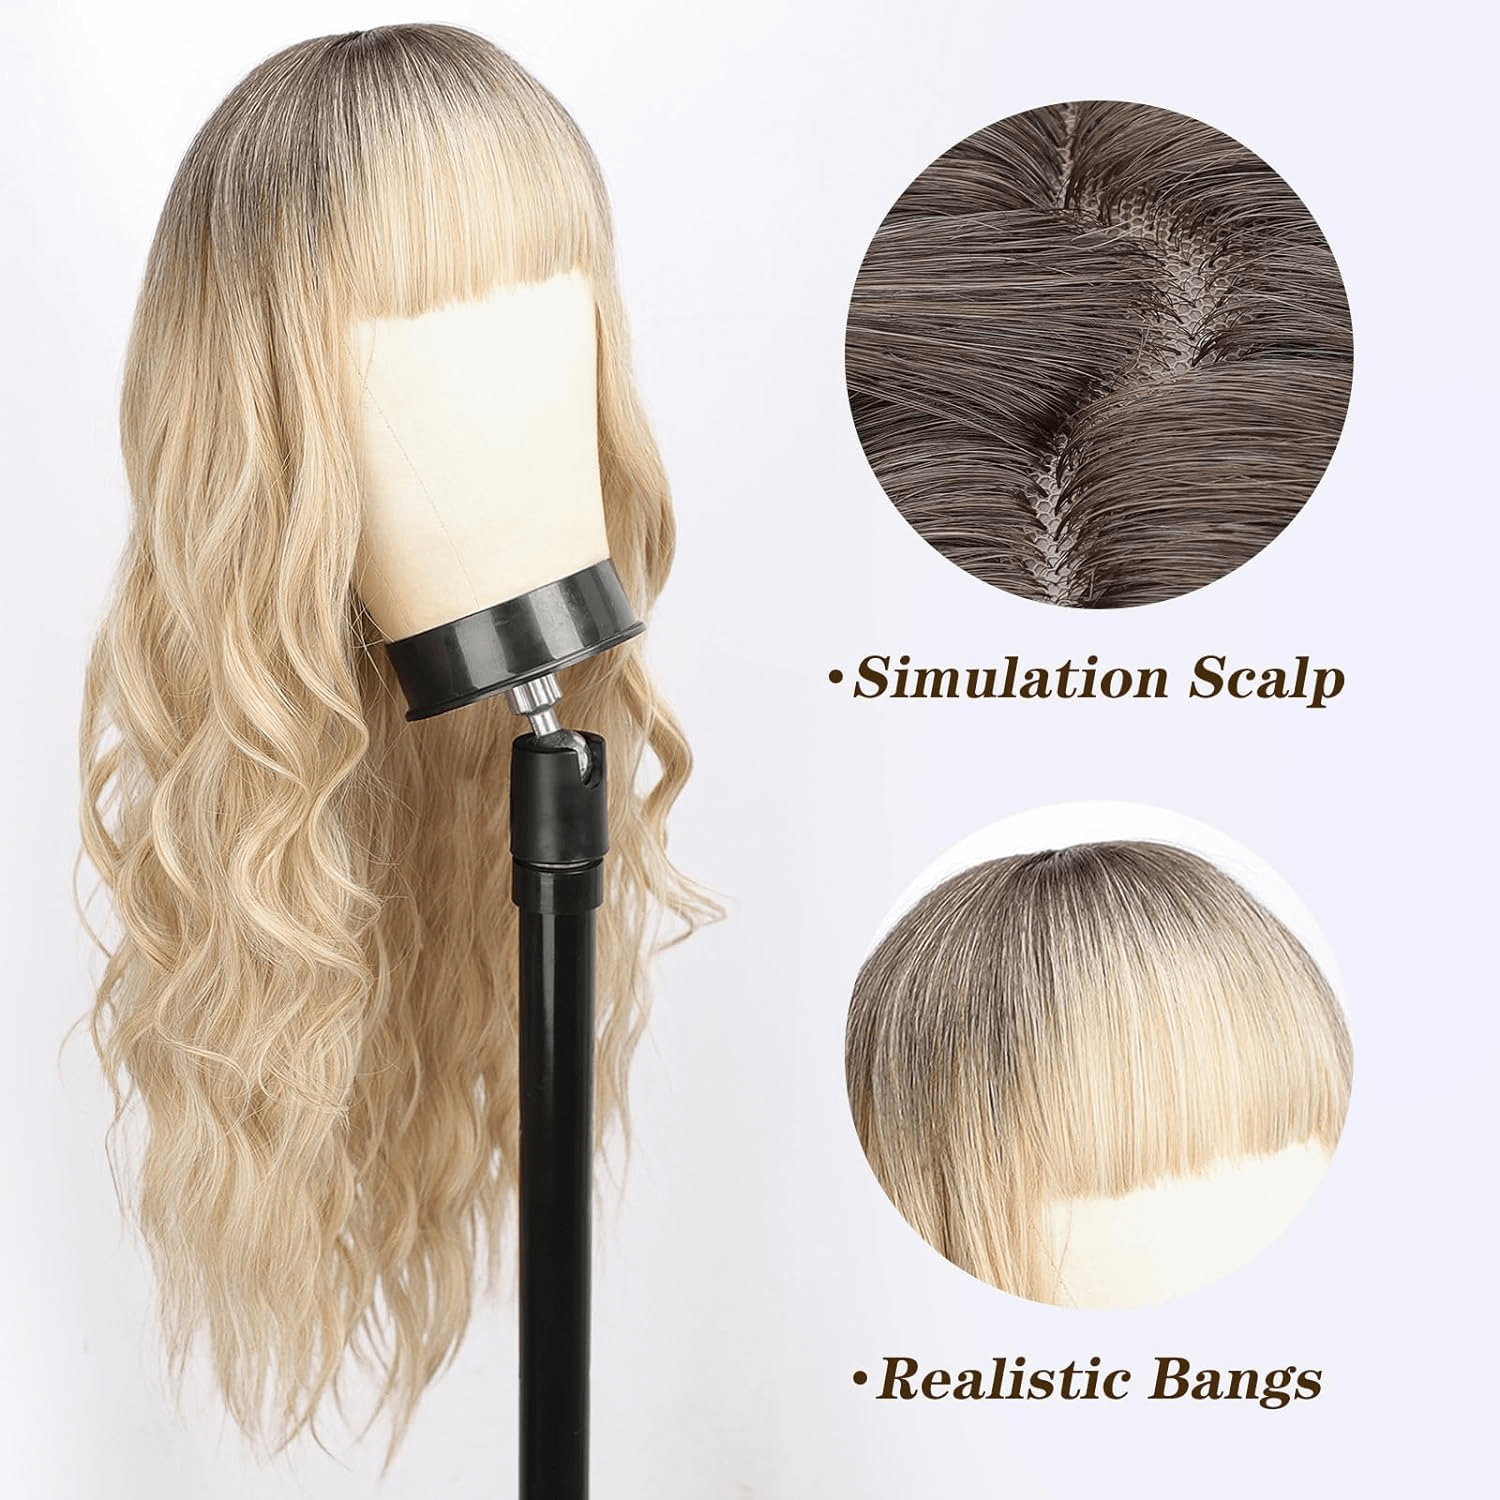 Blonde Wigs with Bangs Long Wavy Curly Ombre Blonde Wig Natural Looking Synthetic Heat Resistant Hair Wigs for Daily Party Wig 26 Inches